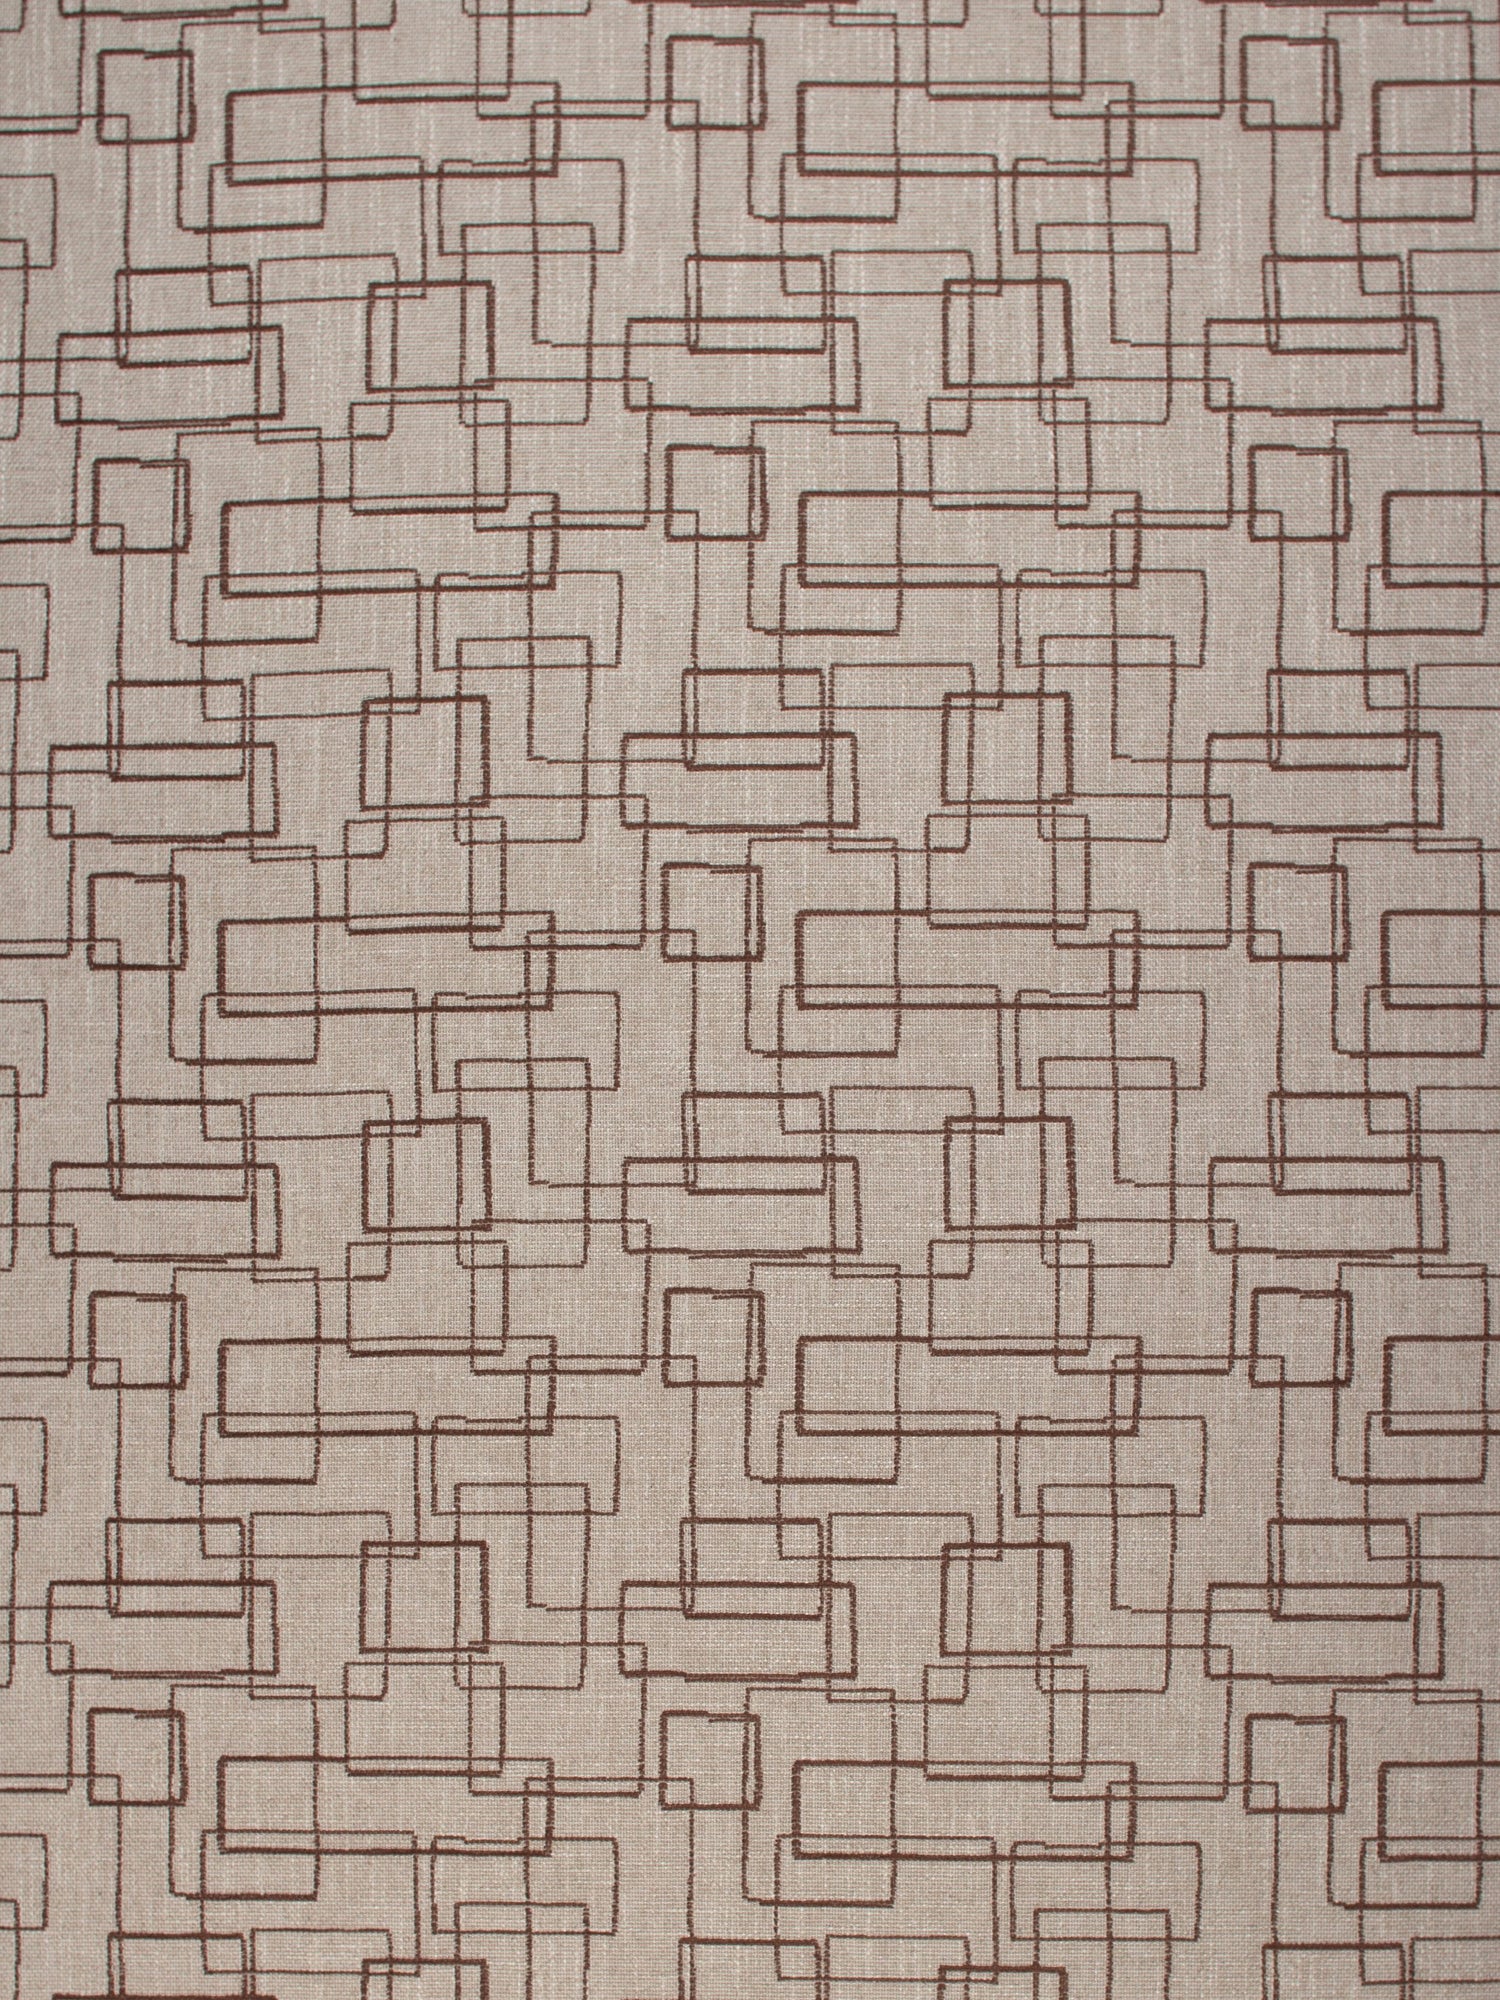 Neutra fabric in walnut color - pattern number BI 00700001 - by Scalamandre in the Old World Weavers collection